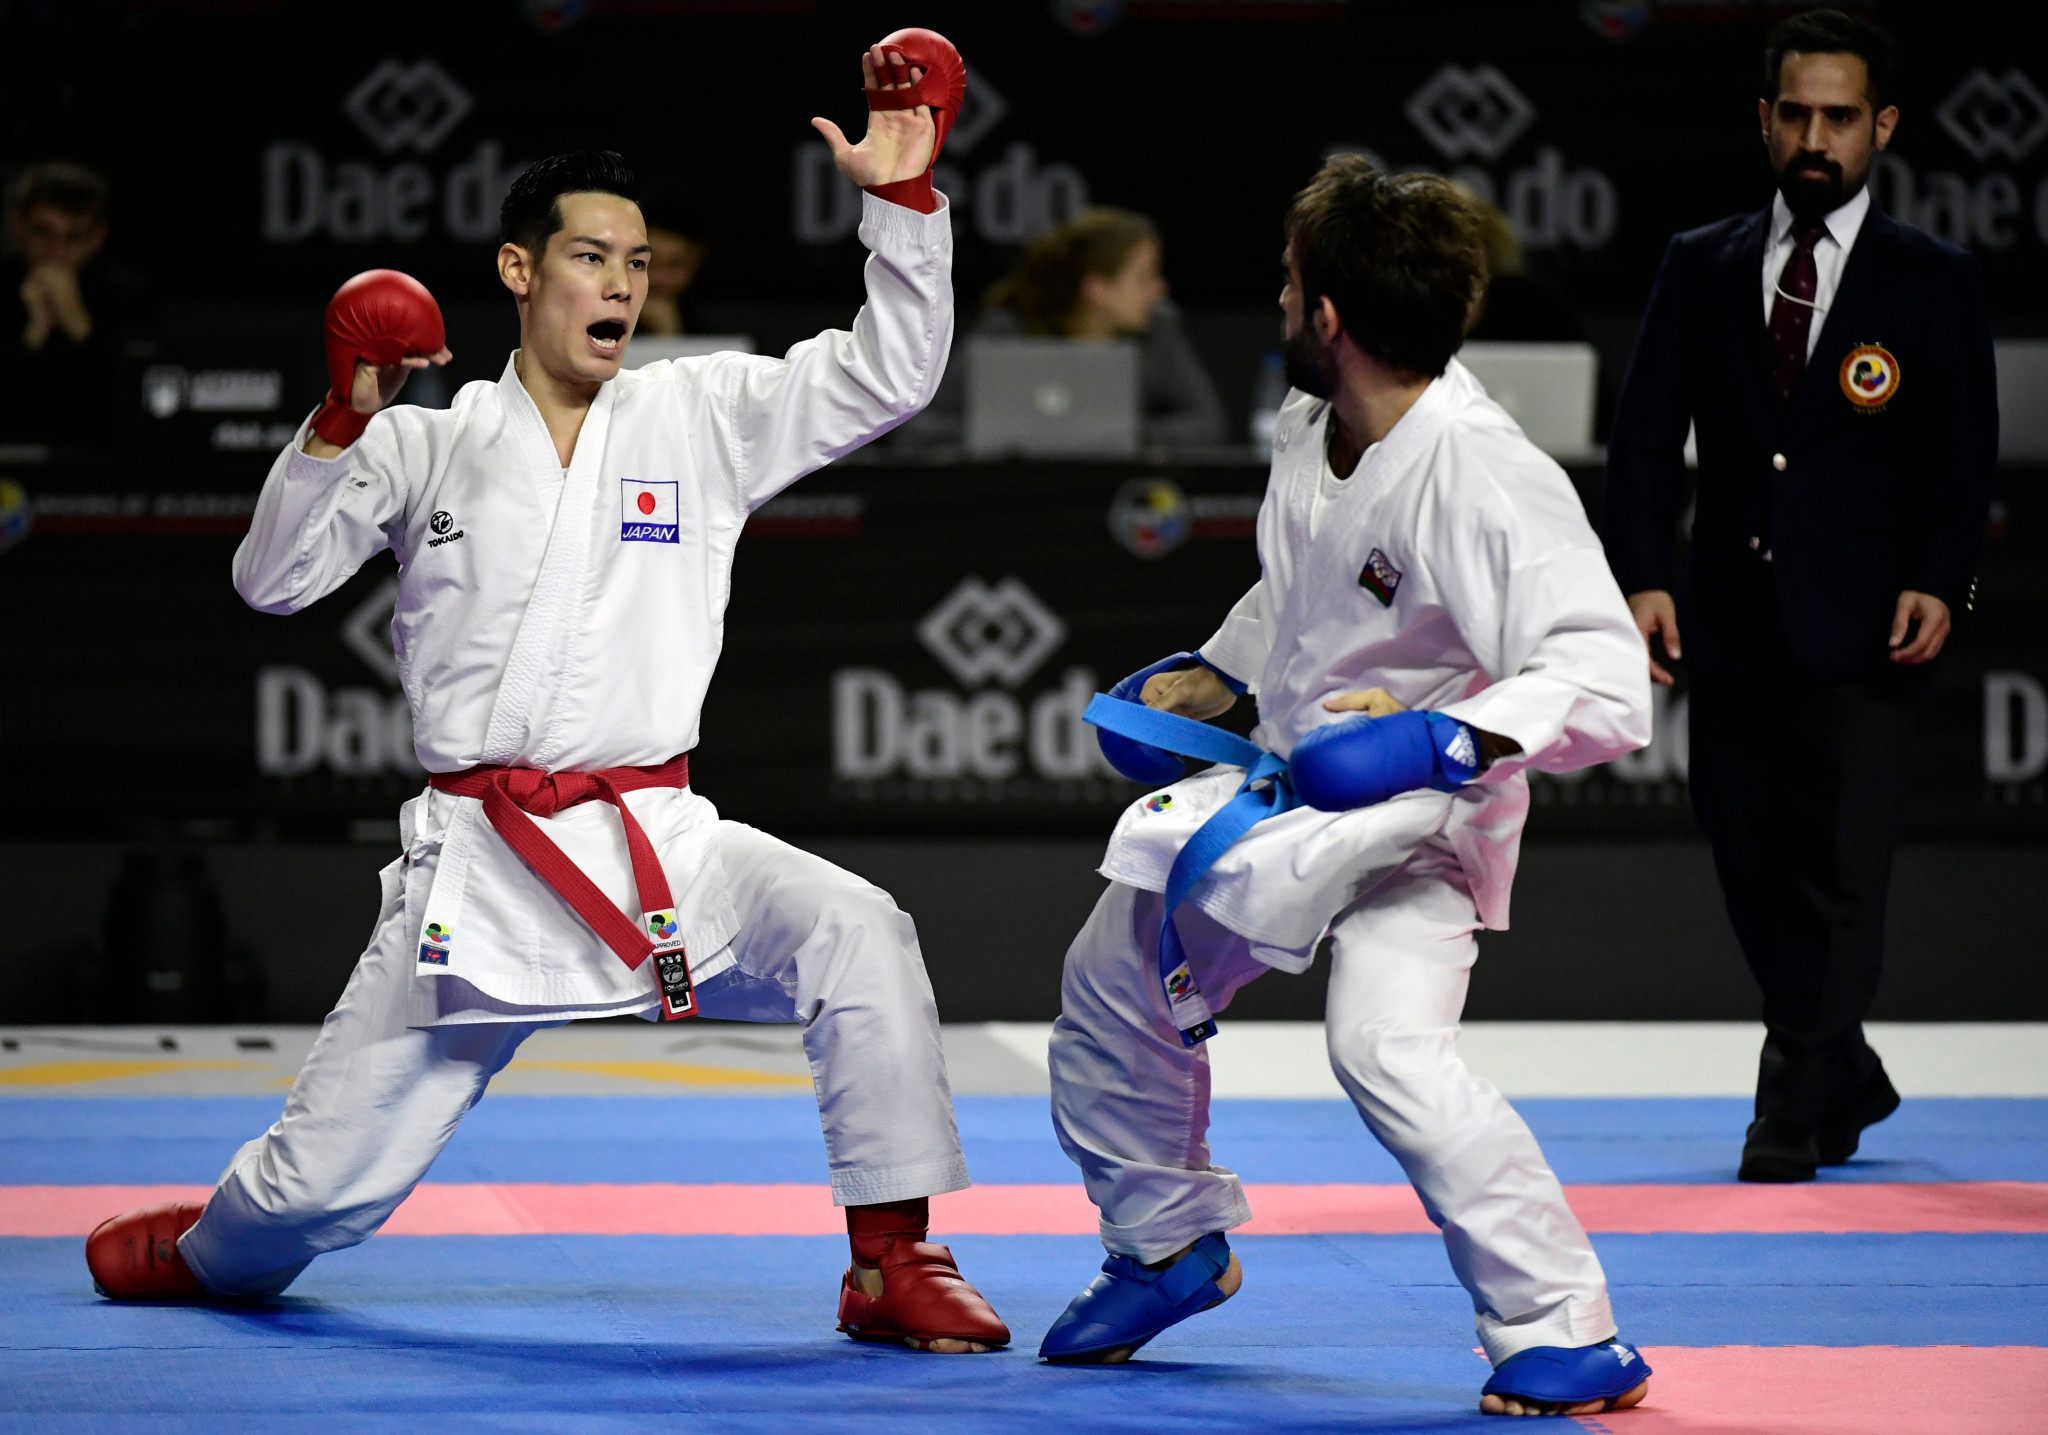 The World Karate Federation has launched a digital campaign as they bid to keep their Paris 2024 Olympic hopes alive ©Getty Images